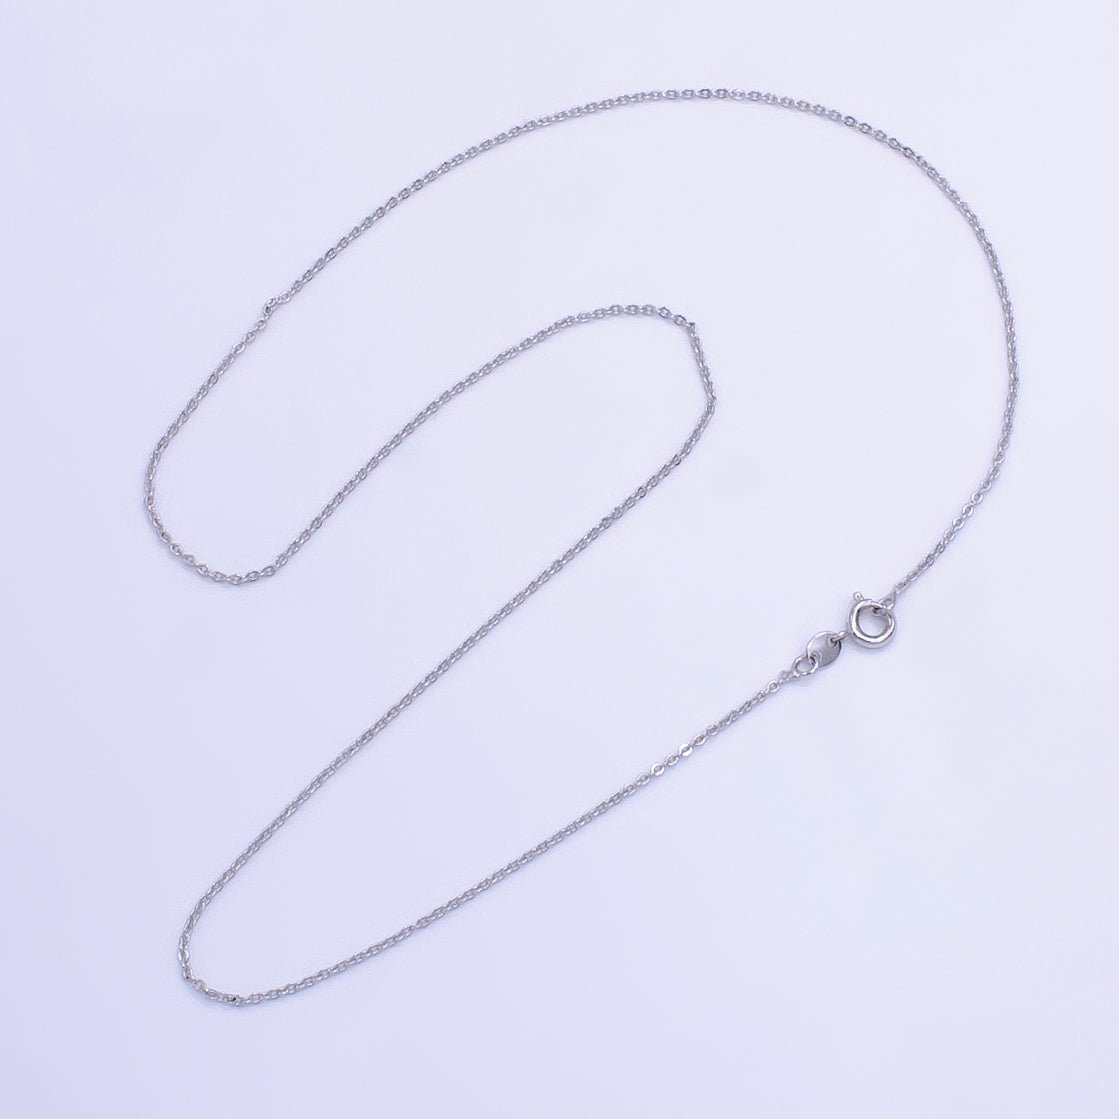 Dainty 18 inch Anchor Necklace, Minimalist Cable Chain in Silver Color, Rhodium Plated Chain For Everyday Wear | CN-635 Clearance Pricing - DLUXCA